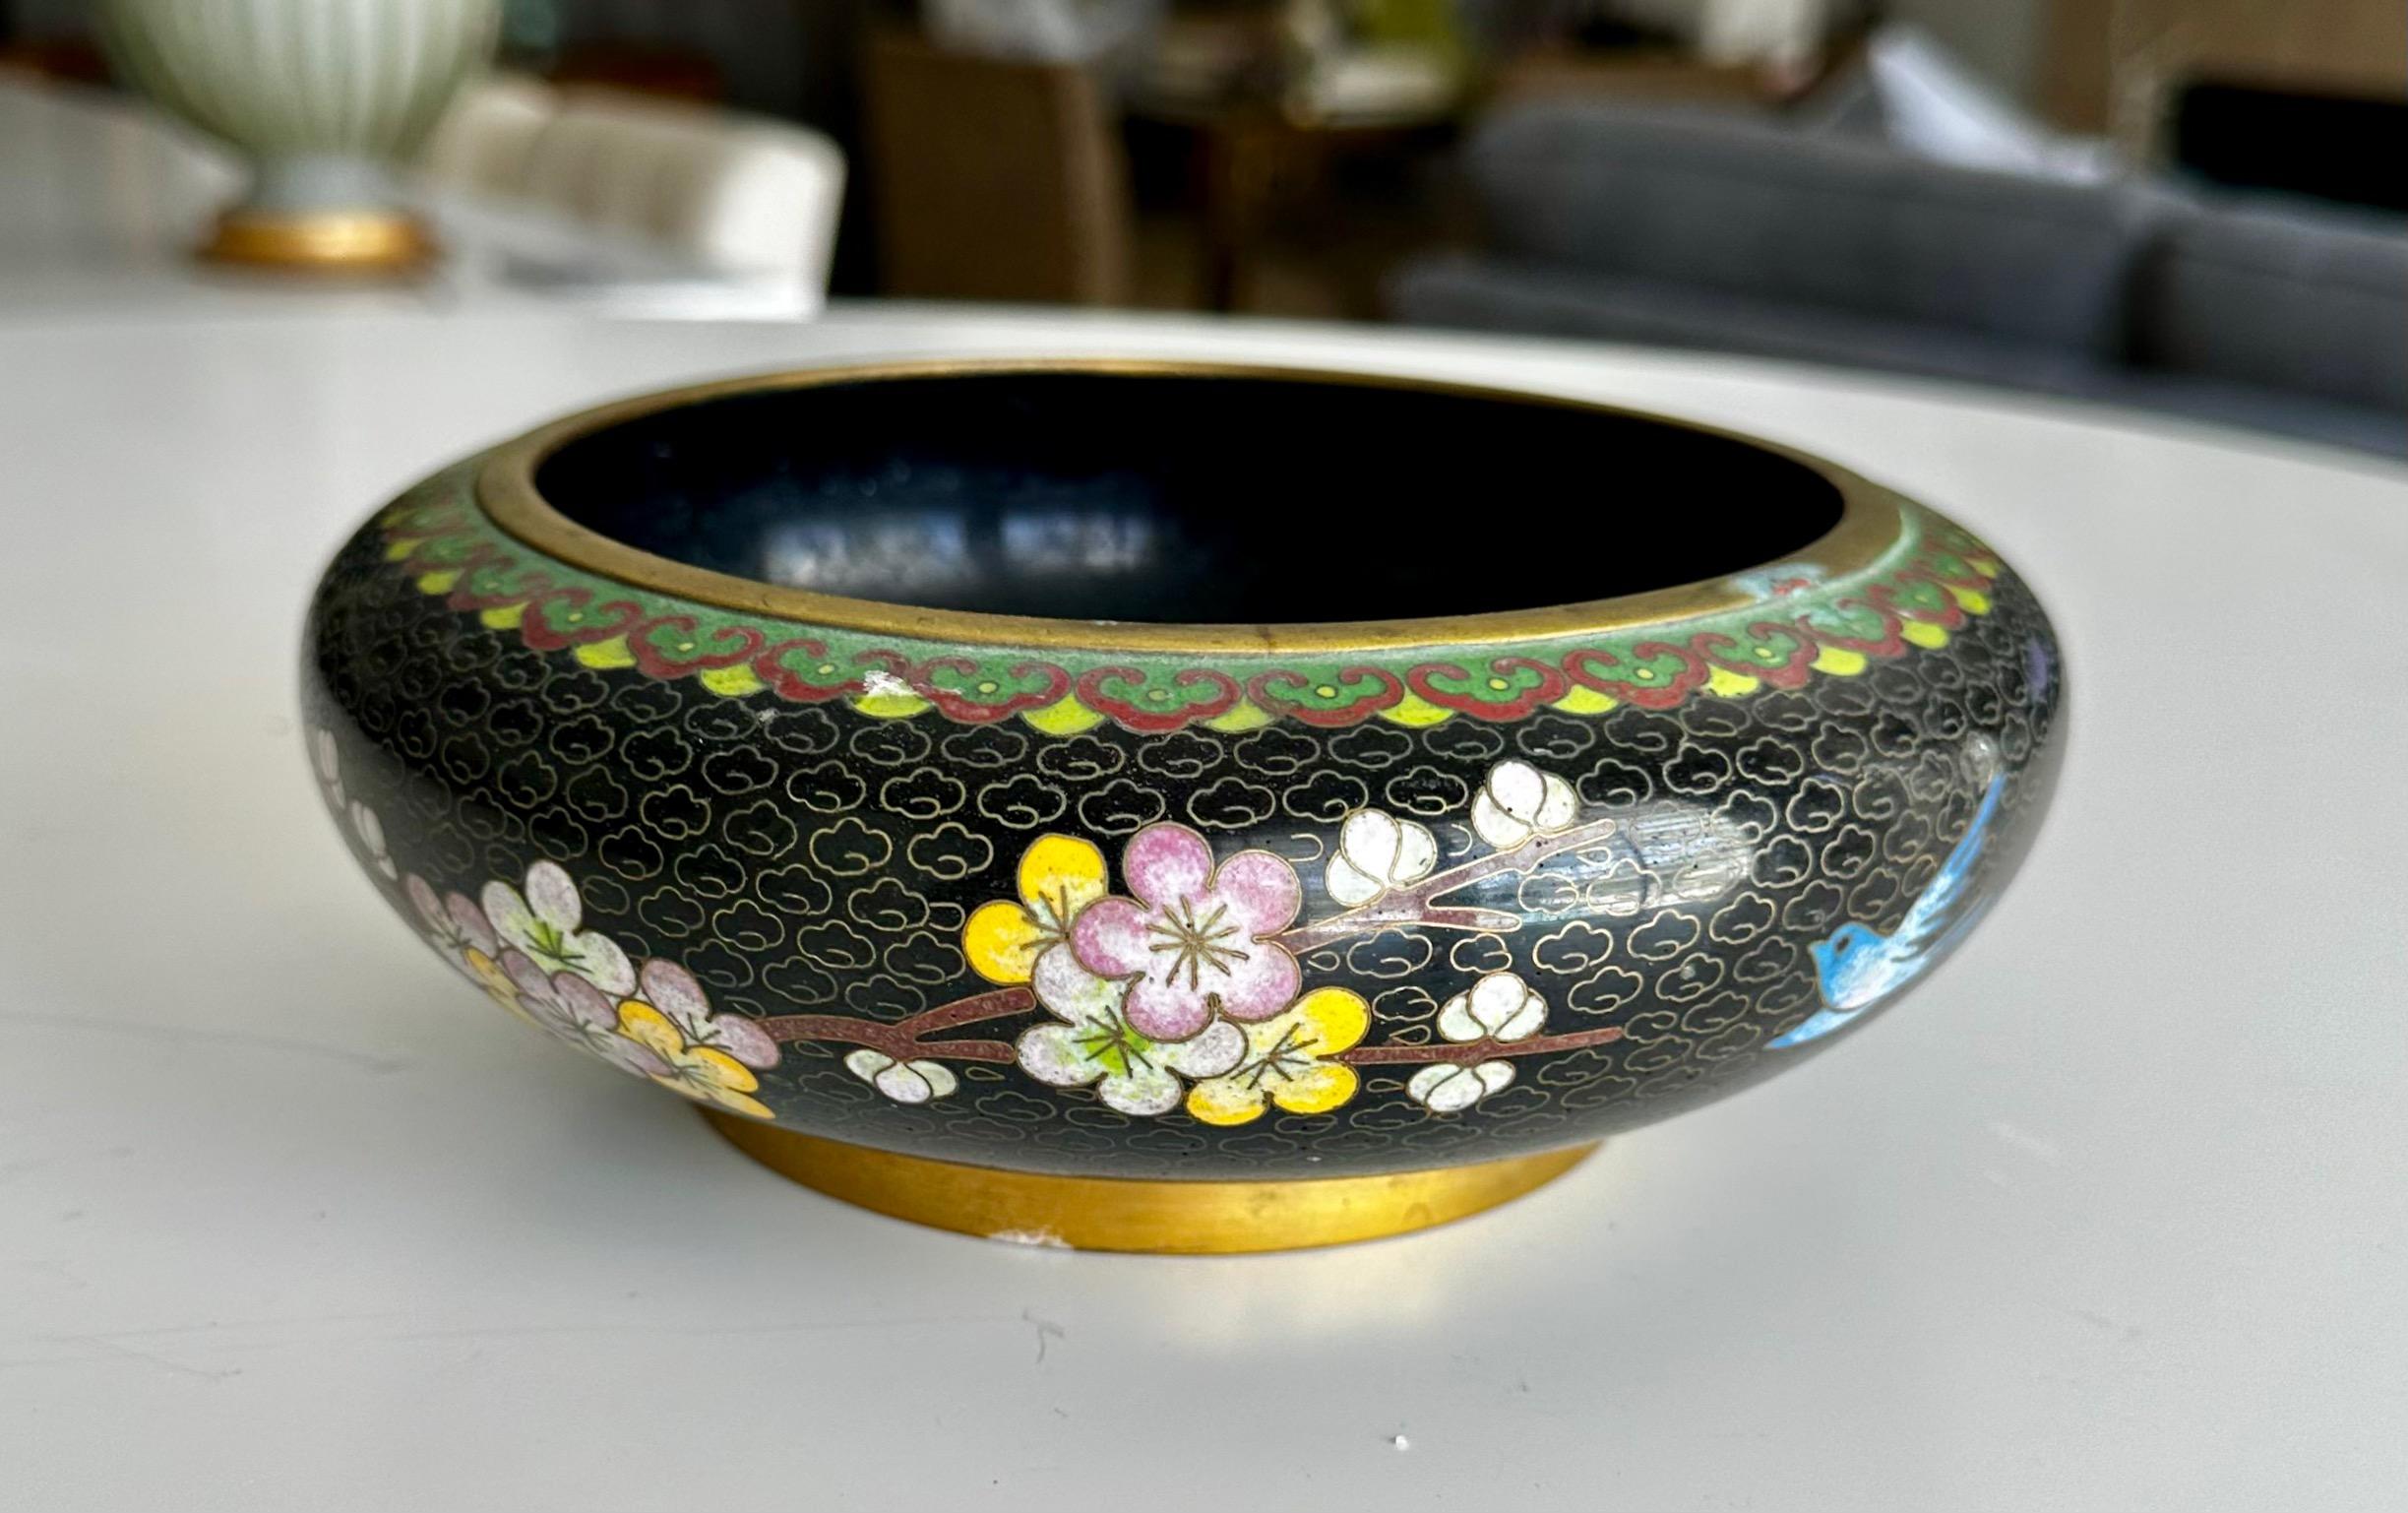 Chinese cloisonne enamel bowl embellished with pink and white flowers, geometric design and birds.